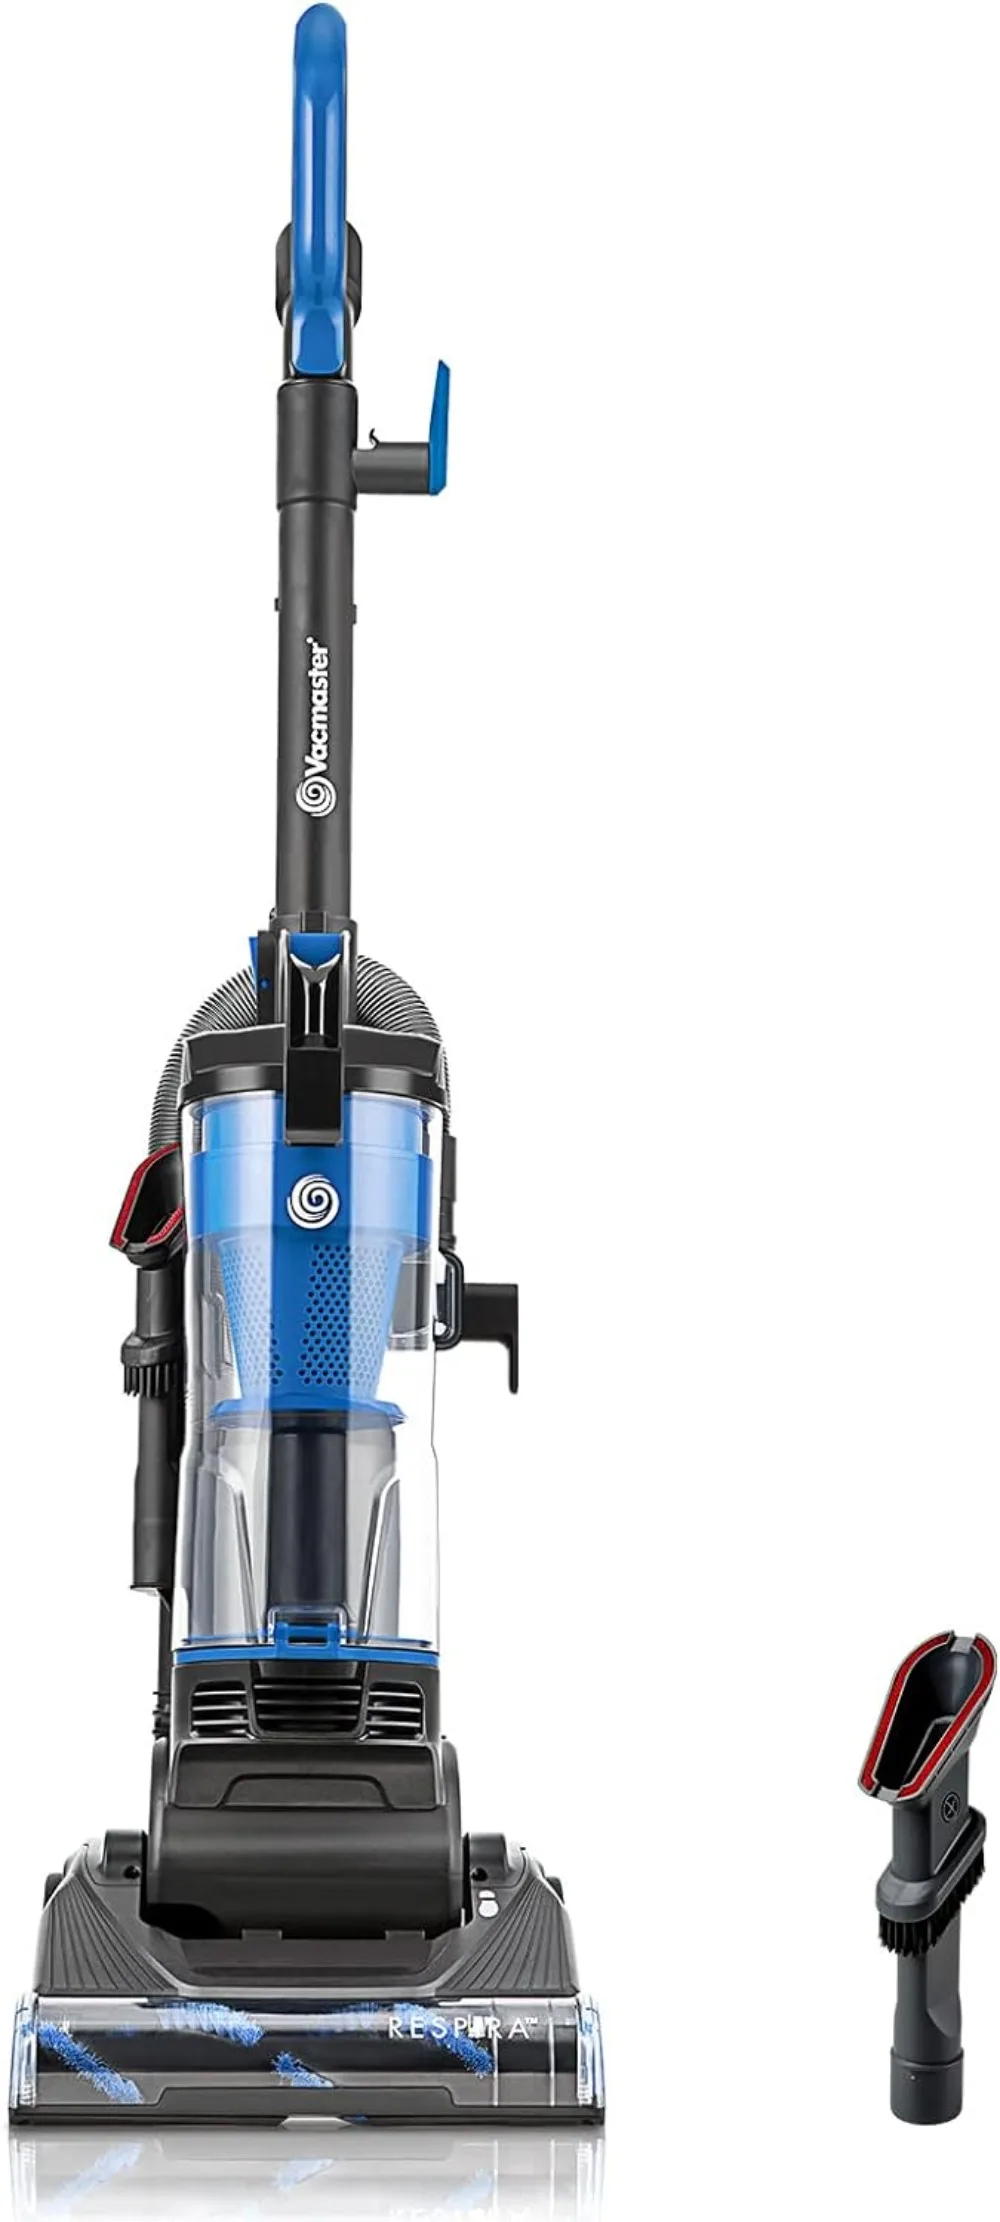 

Vacmaster UC0501 Bagless Upright Vacuum Cleaner with Large Dust Cup Capacity, Efficient Cyclone Filtration System & 17ft Cord